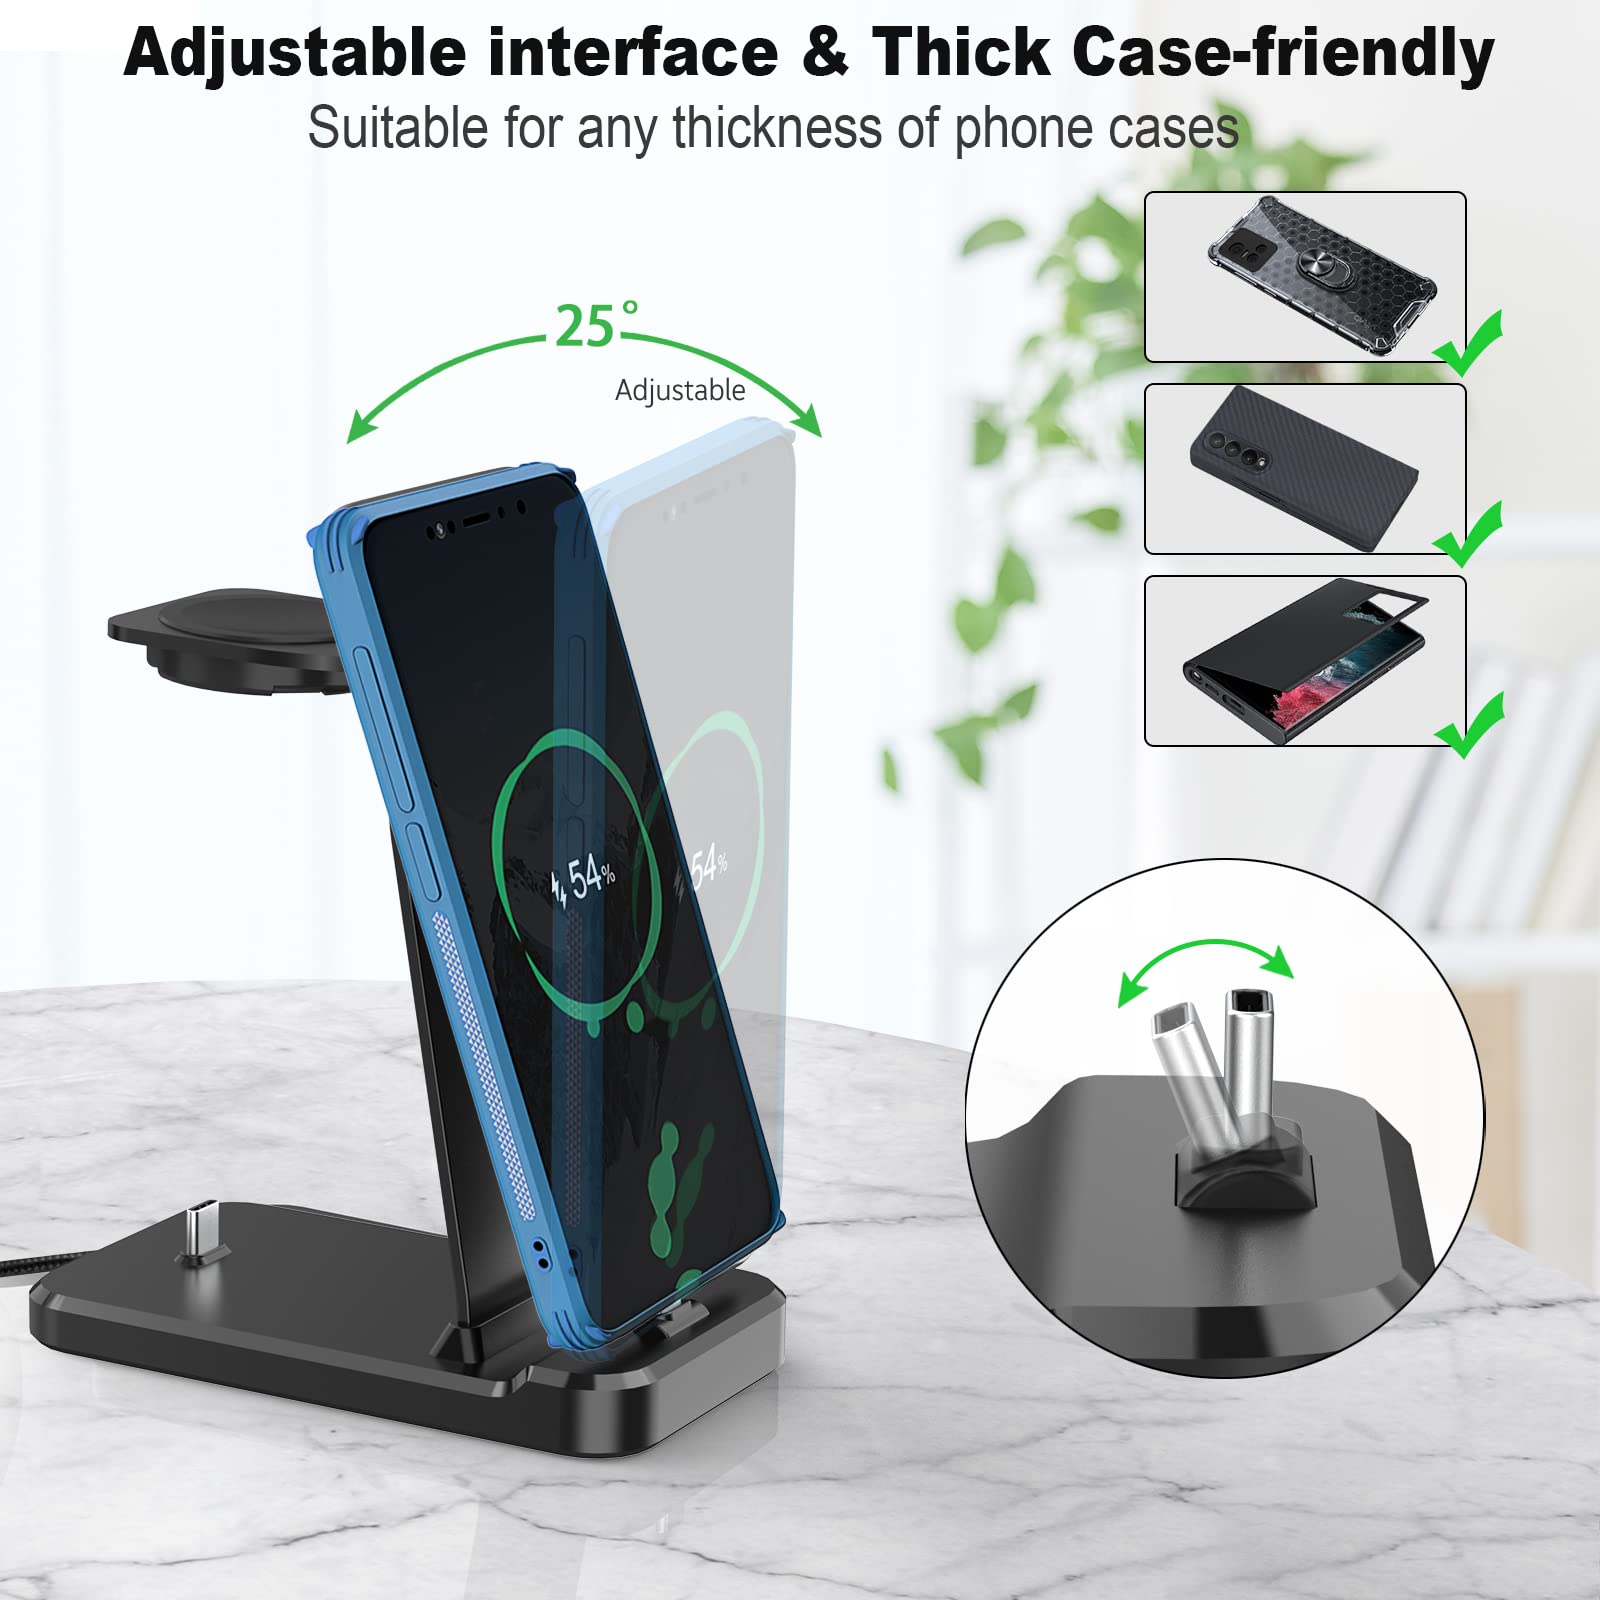 Charging Station for Samsung Multiple Devices,3 In 1 Fast Charging Stand Wireless Charger for Samsung Galaxy Watch 5/5 Pro/4/3/Active,Galaxy S23/S22/S21/S20/Note20/Note10/Z Flip 4/Z Fold 4,Galaxy Buds